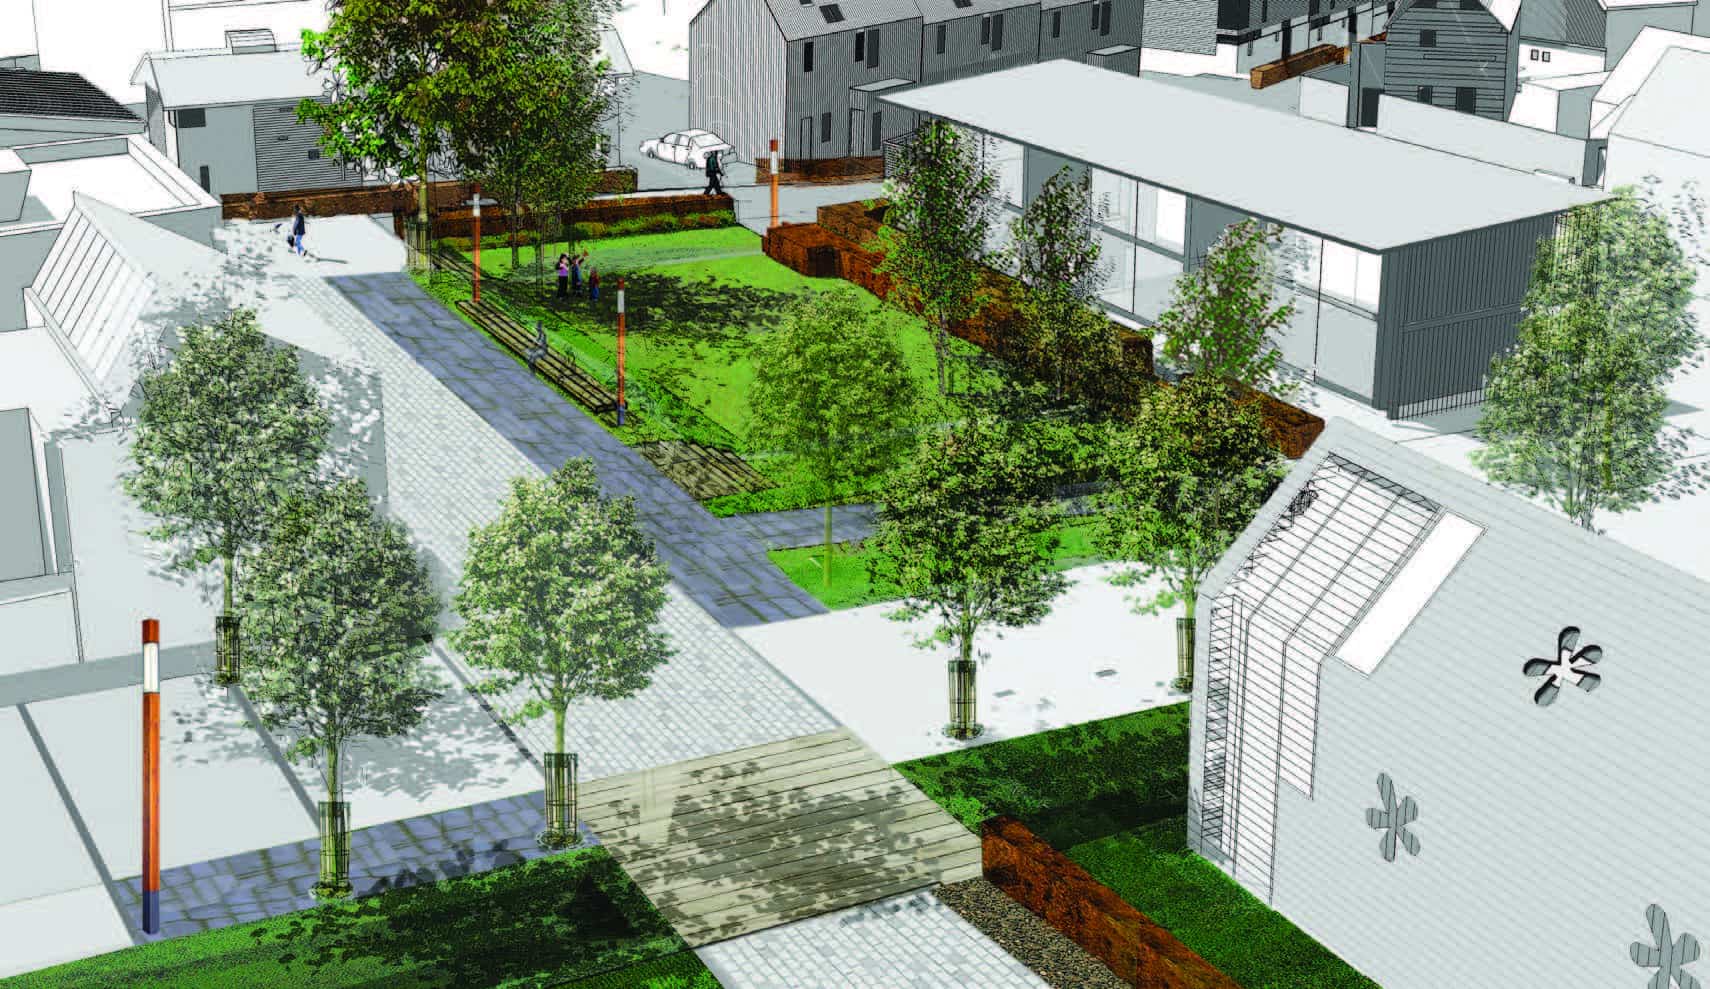   An architectural illustration of the streetscape at Scotland's Housing Expo, with modern buildings, green spaces, pathways and trees.